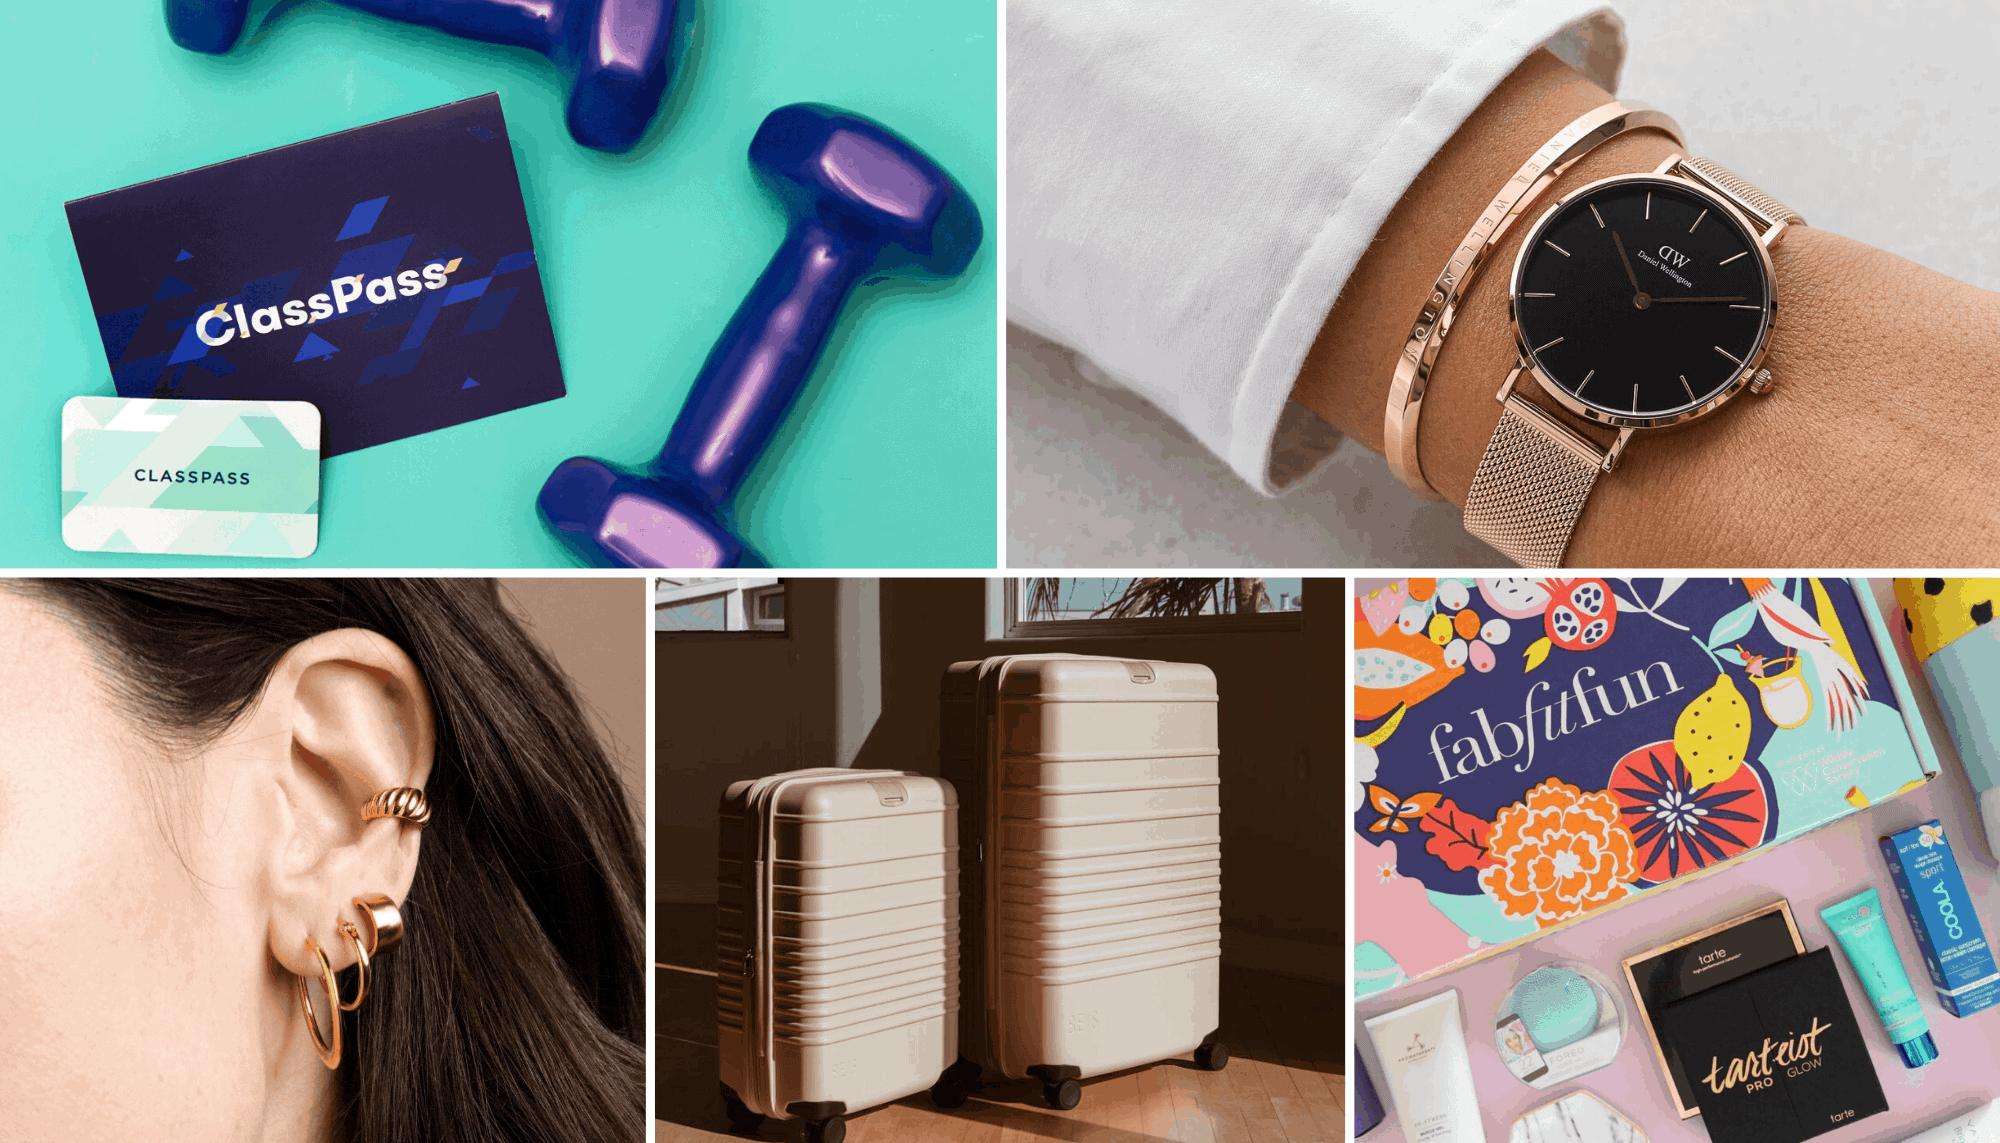 30 Most Popular Christmas Gifts for College Girl - By Sophia Lee